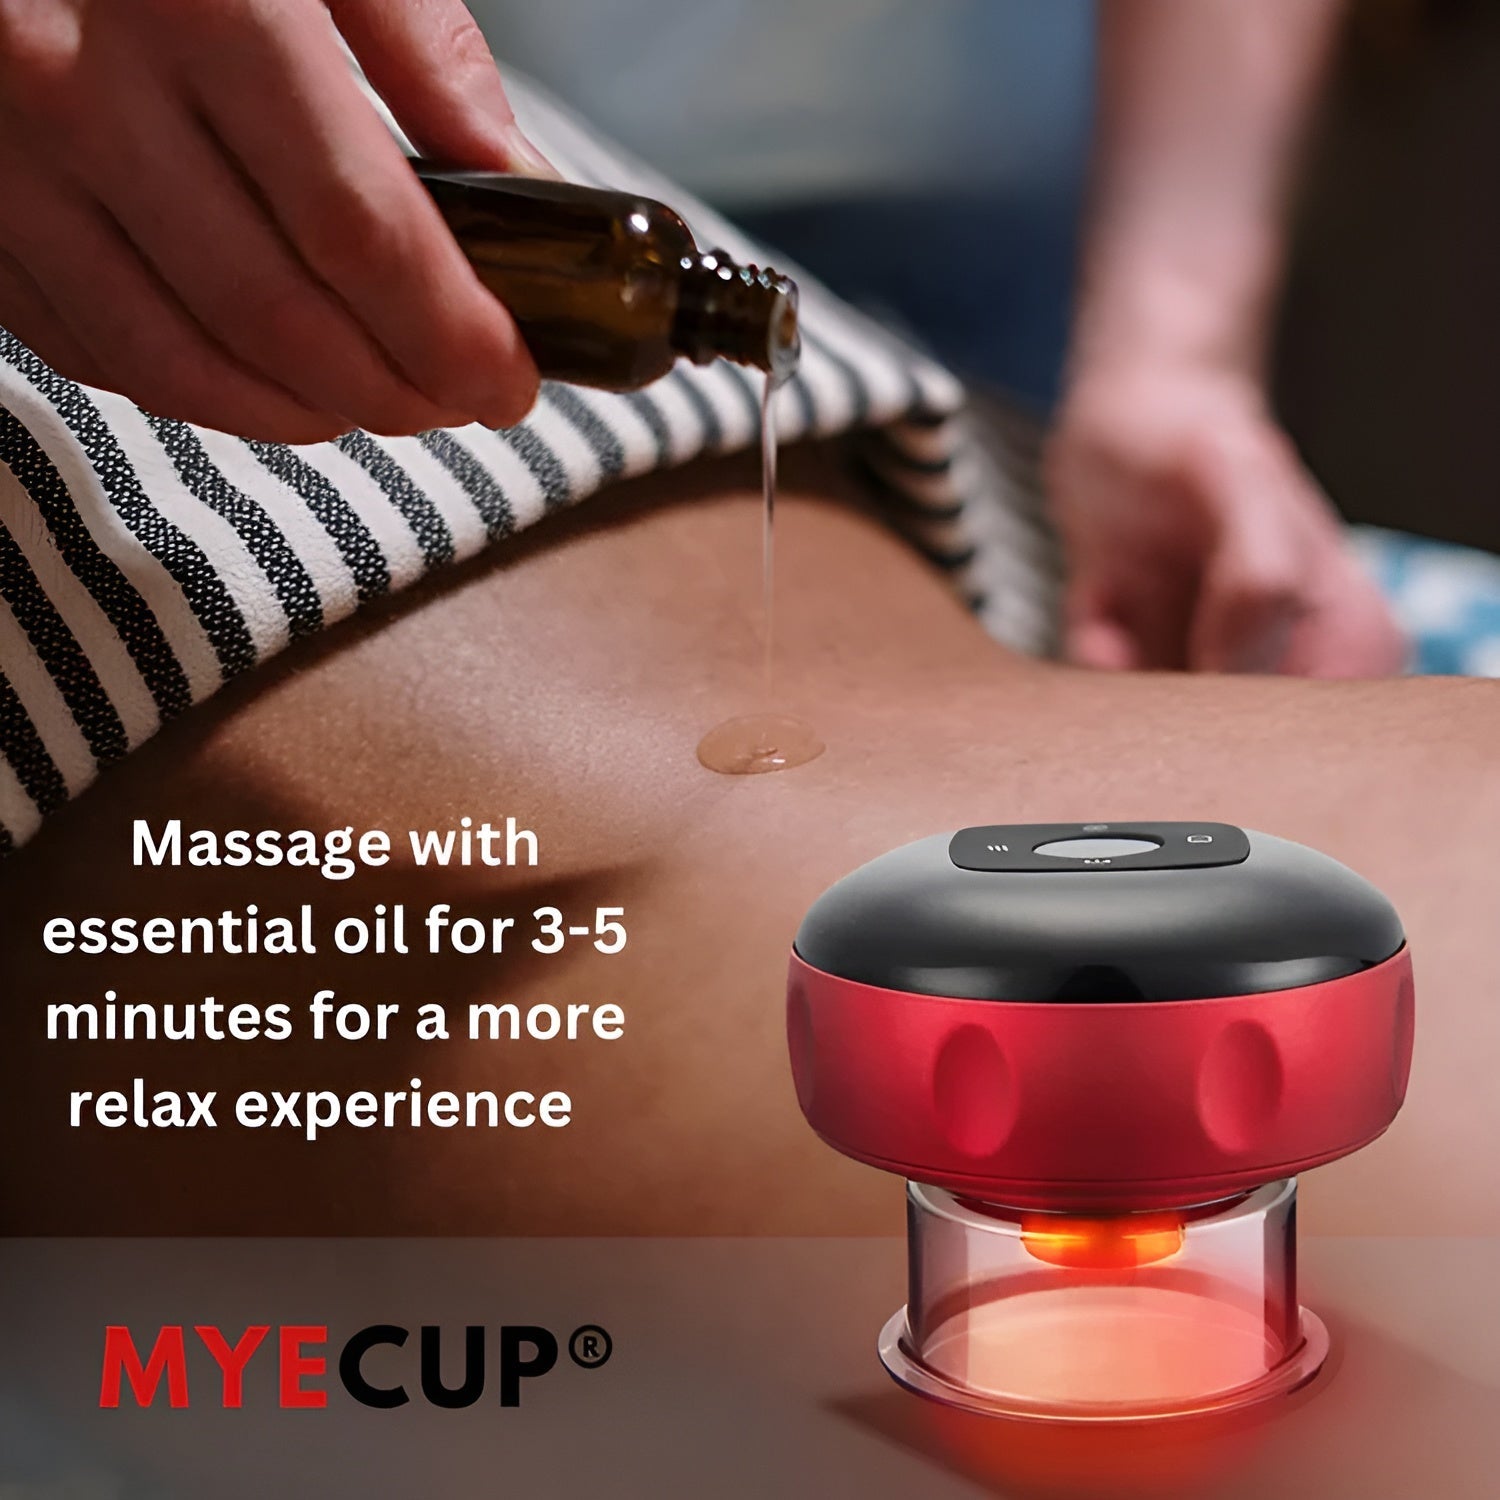 MyeCup™ Smart Cupping Kit